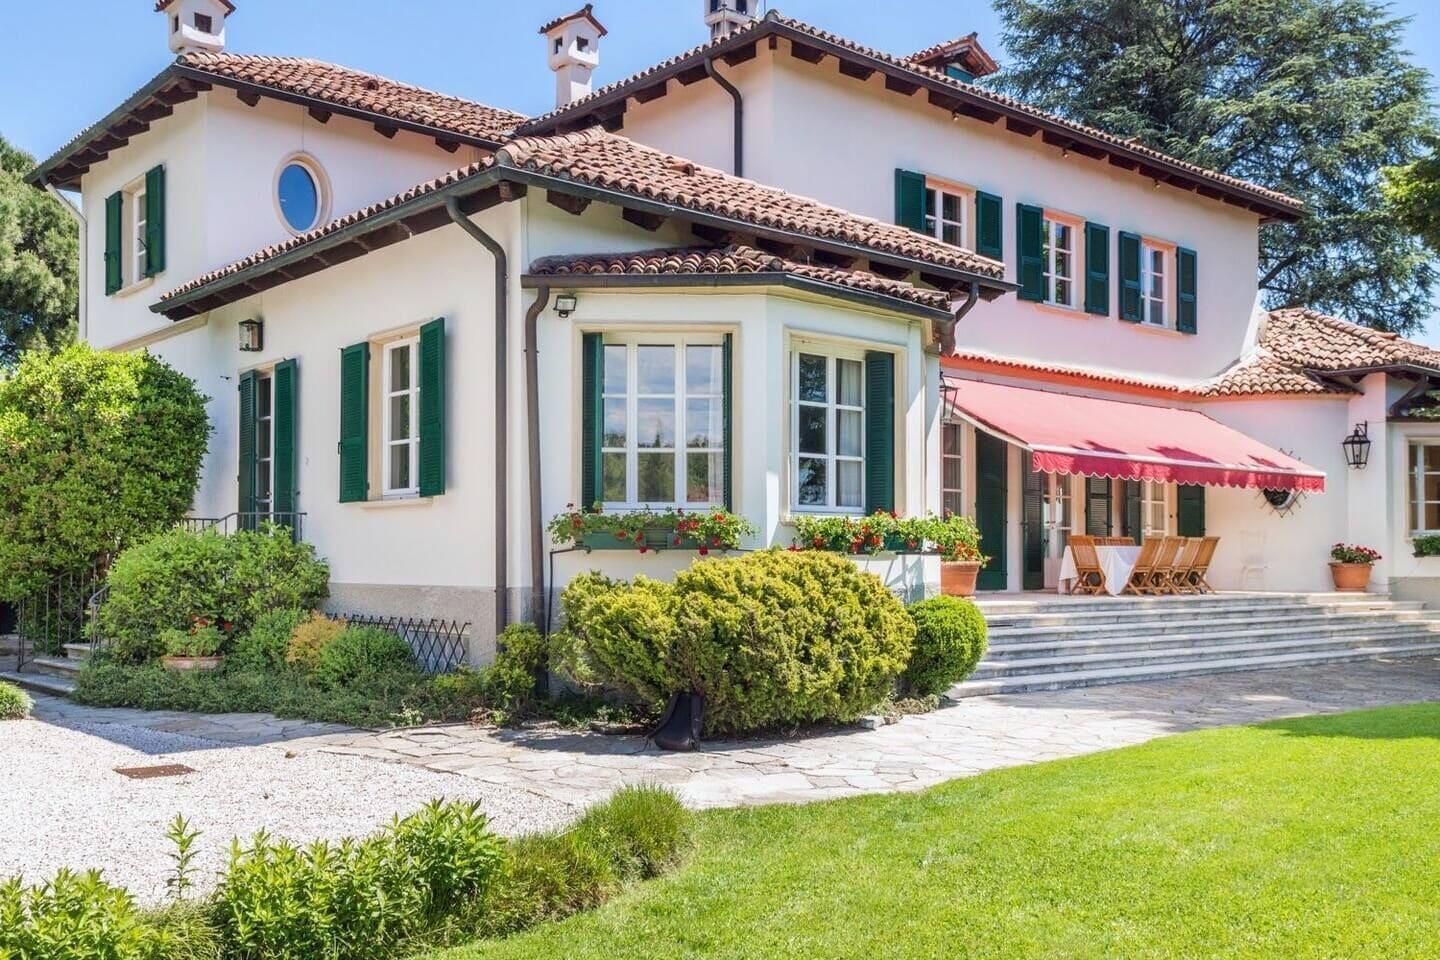 Pet Friendly Stunning 6BR Private Villa with Pool Near Venice